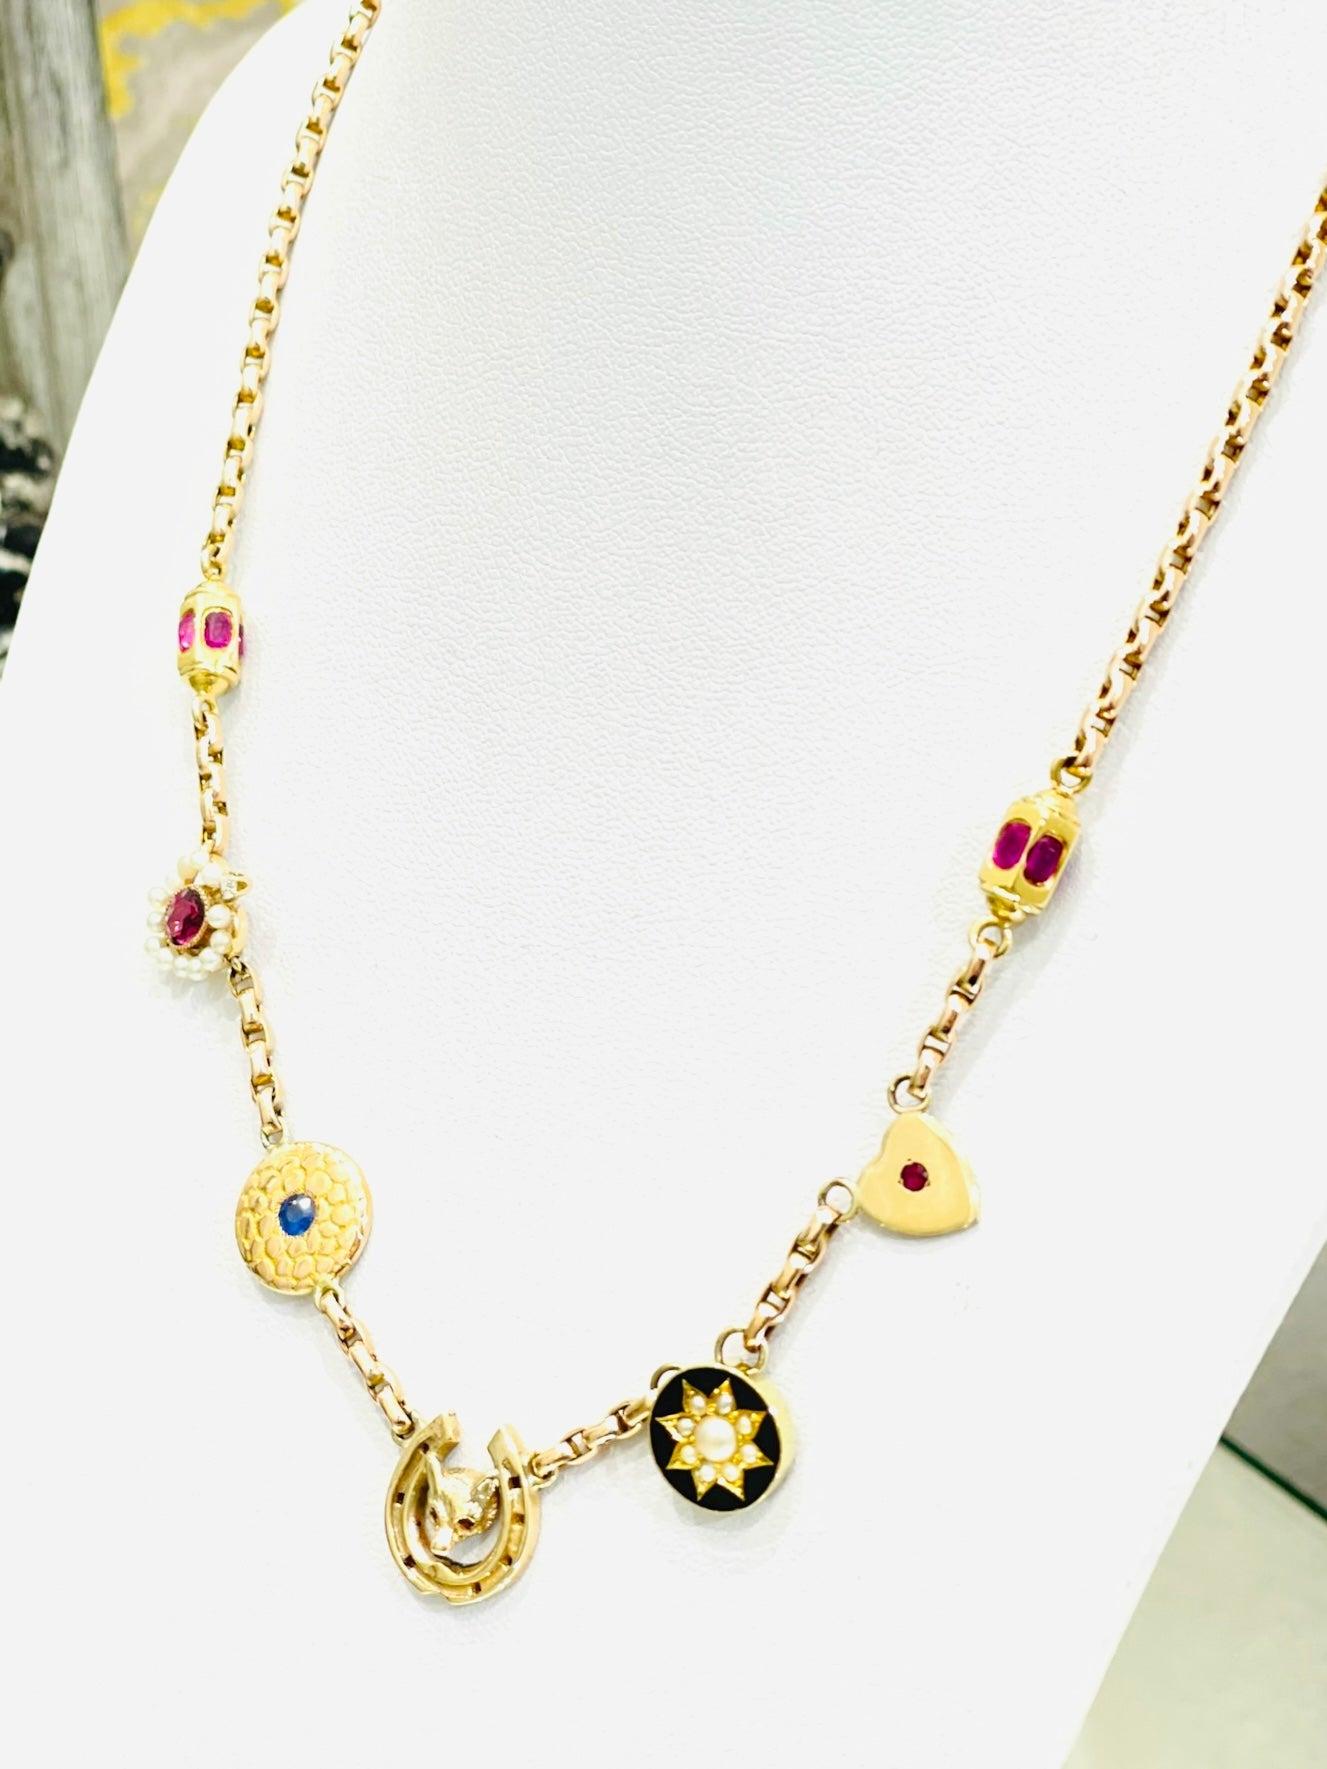 Victorian Charm Necklace 15ct Gold With Rubies, Sapphires & Pearls In Excellent Condition For Sale In London, GB